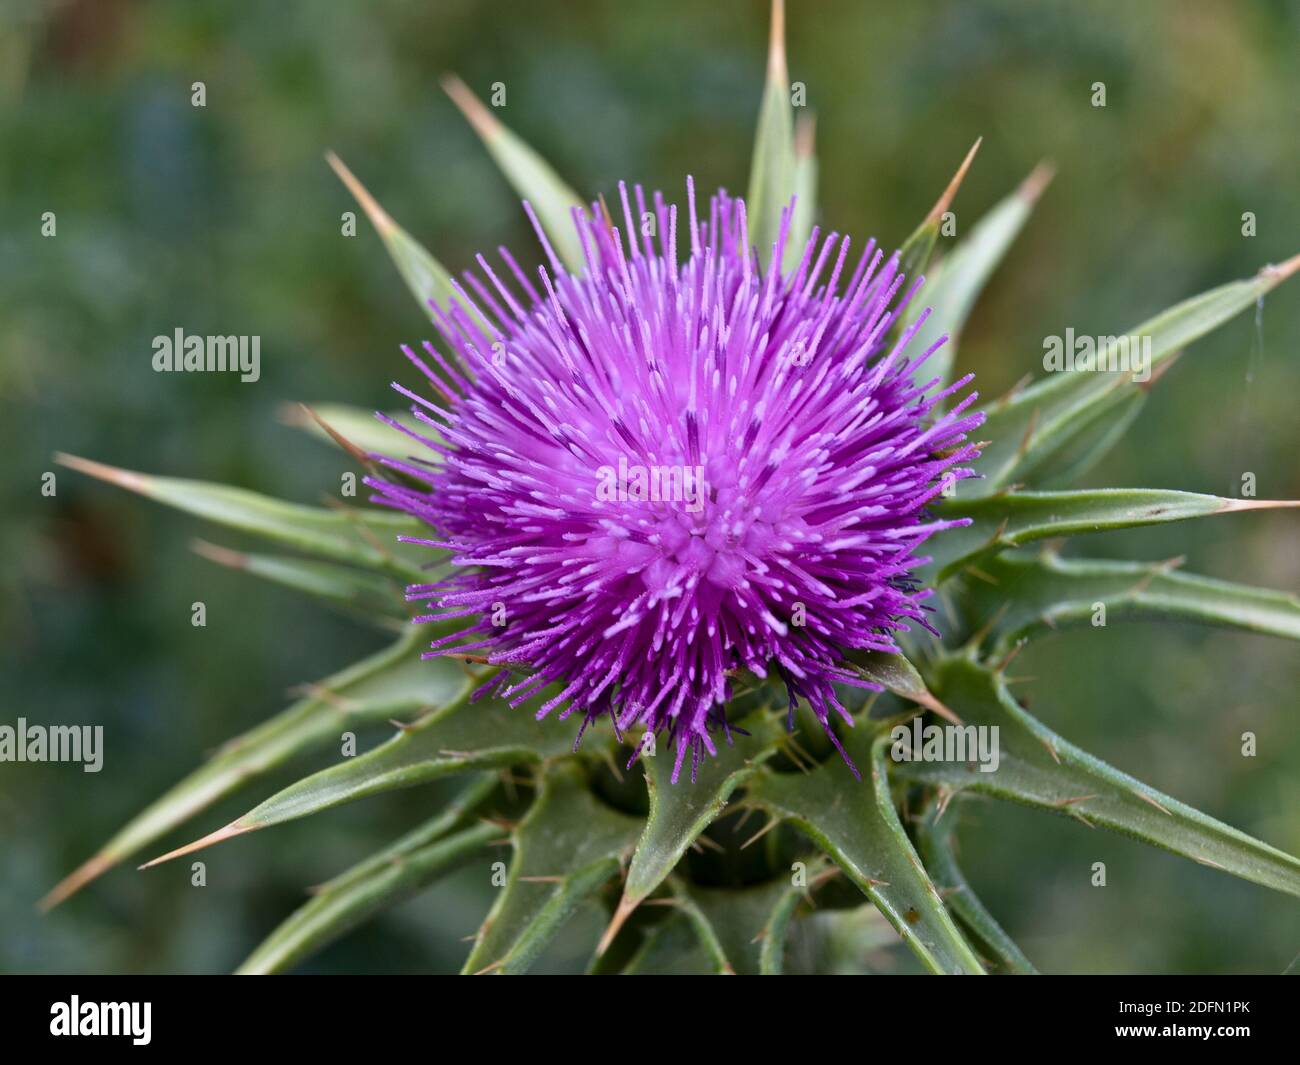 A thistle with a purple flower Stock Photo